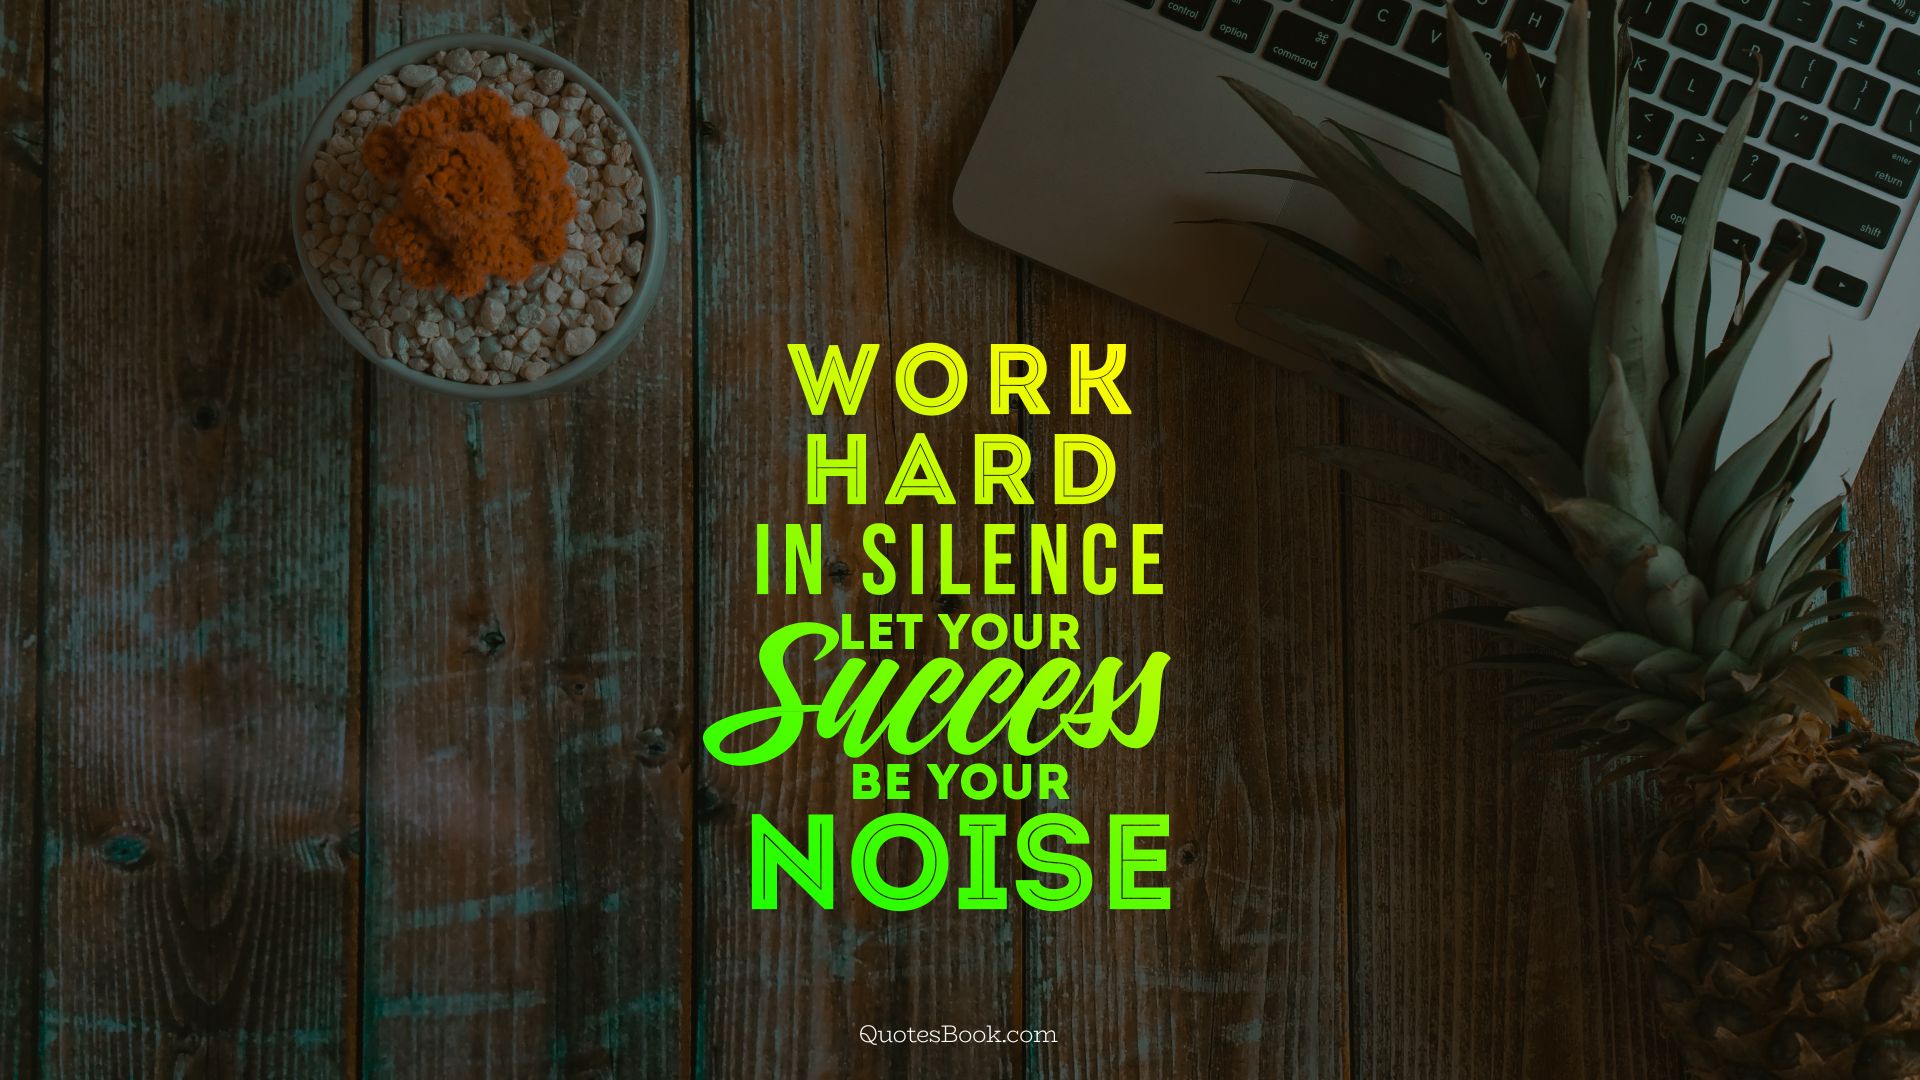 Work hard in silence let your success be your noise. - Quote by John Adams